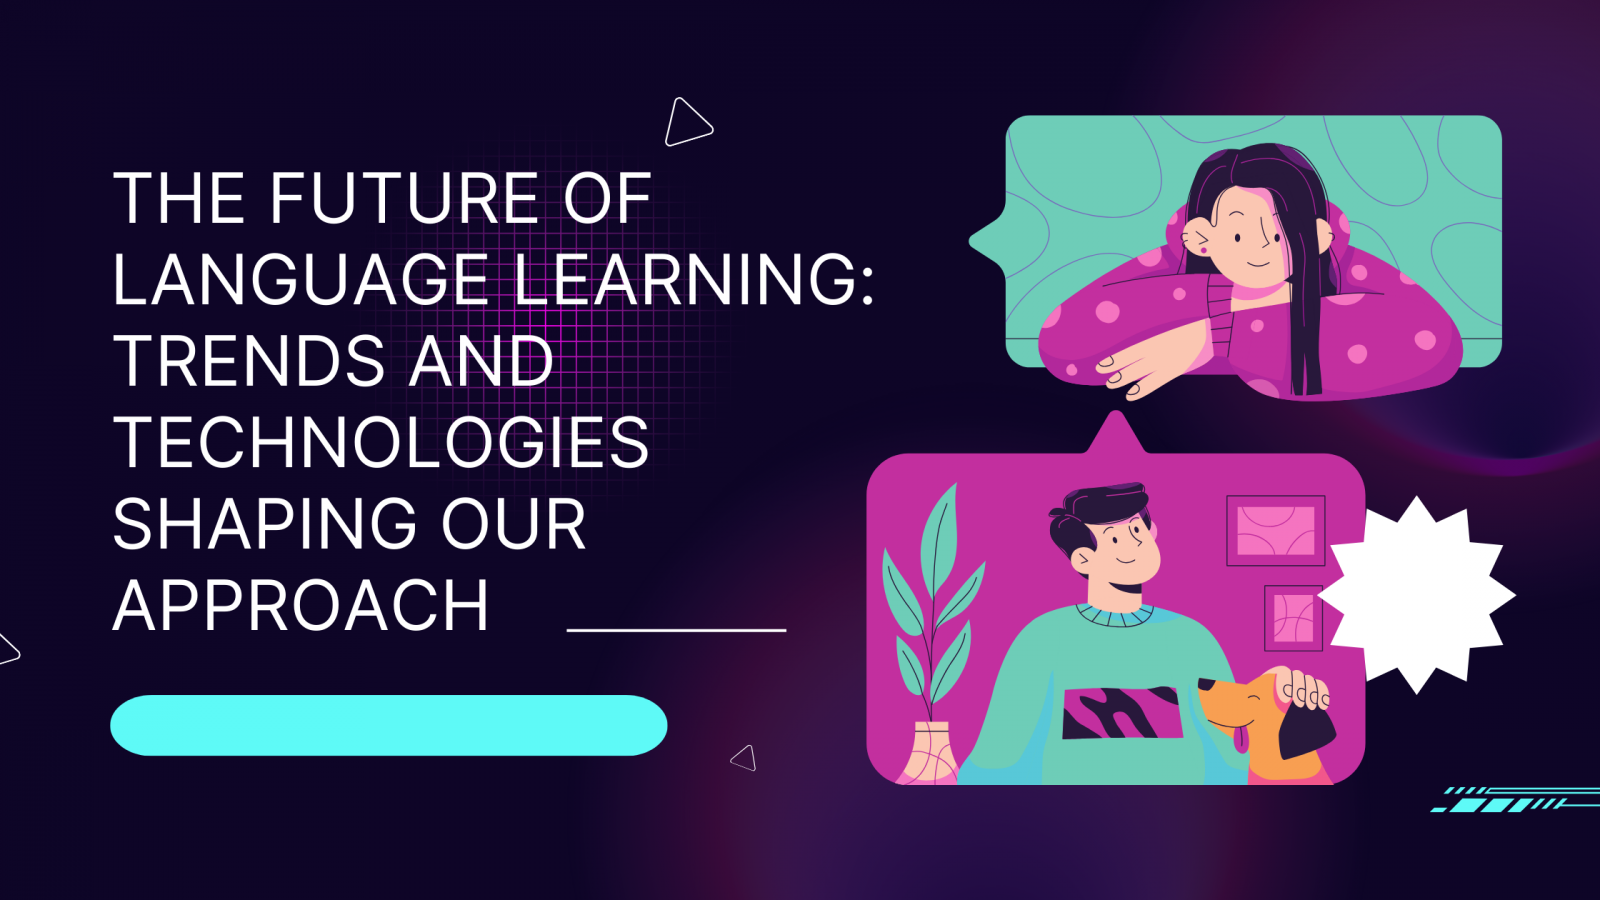 The Future of Language Learning: Trends and Technologies Shaping Our Approach